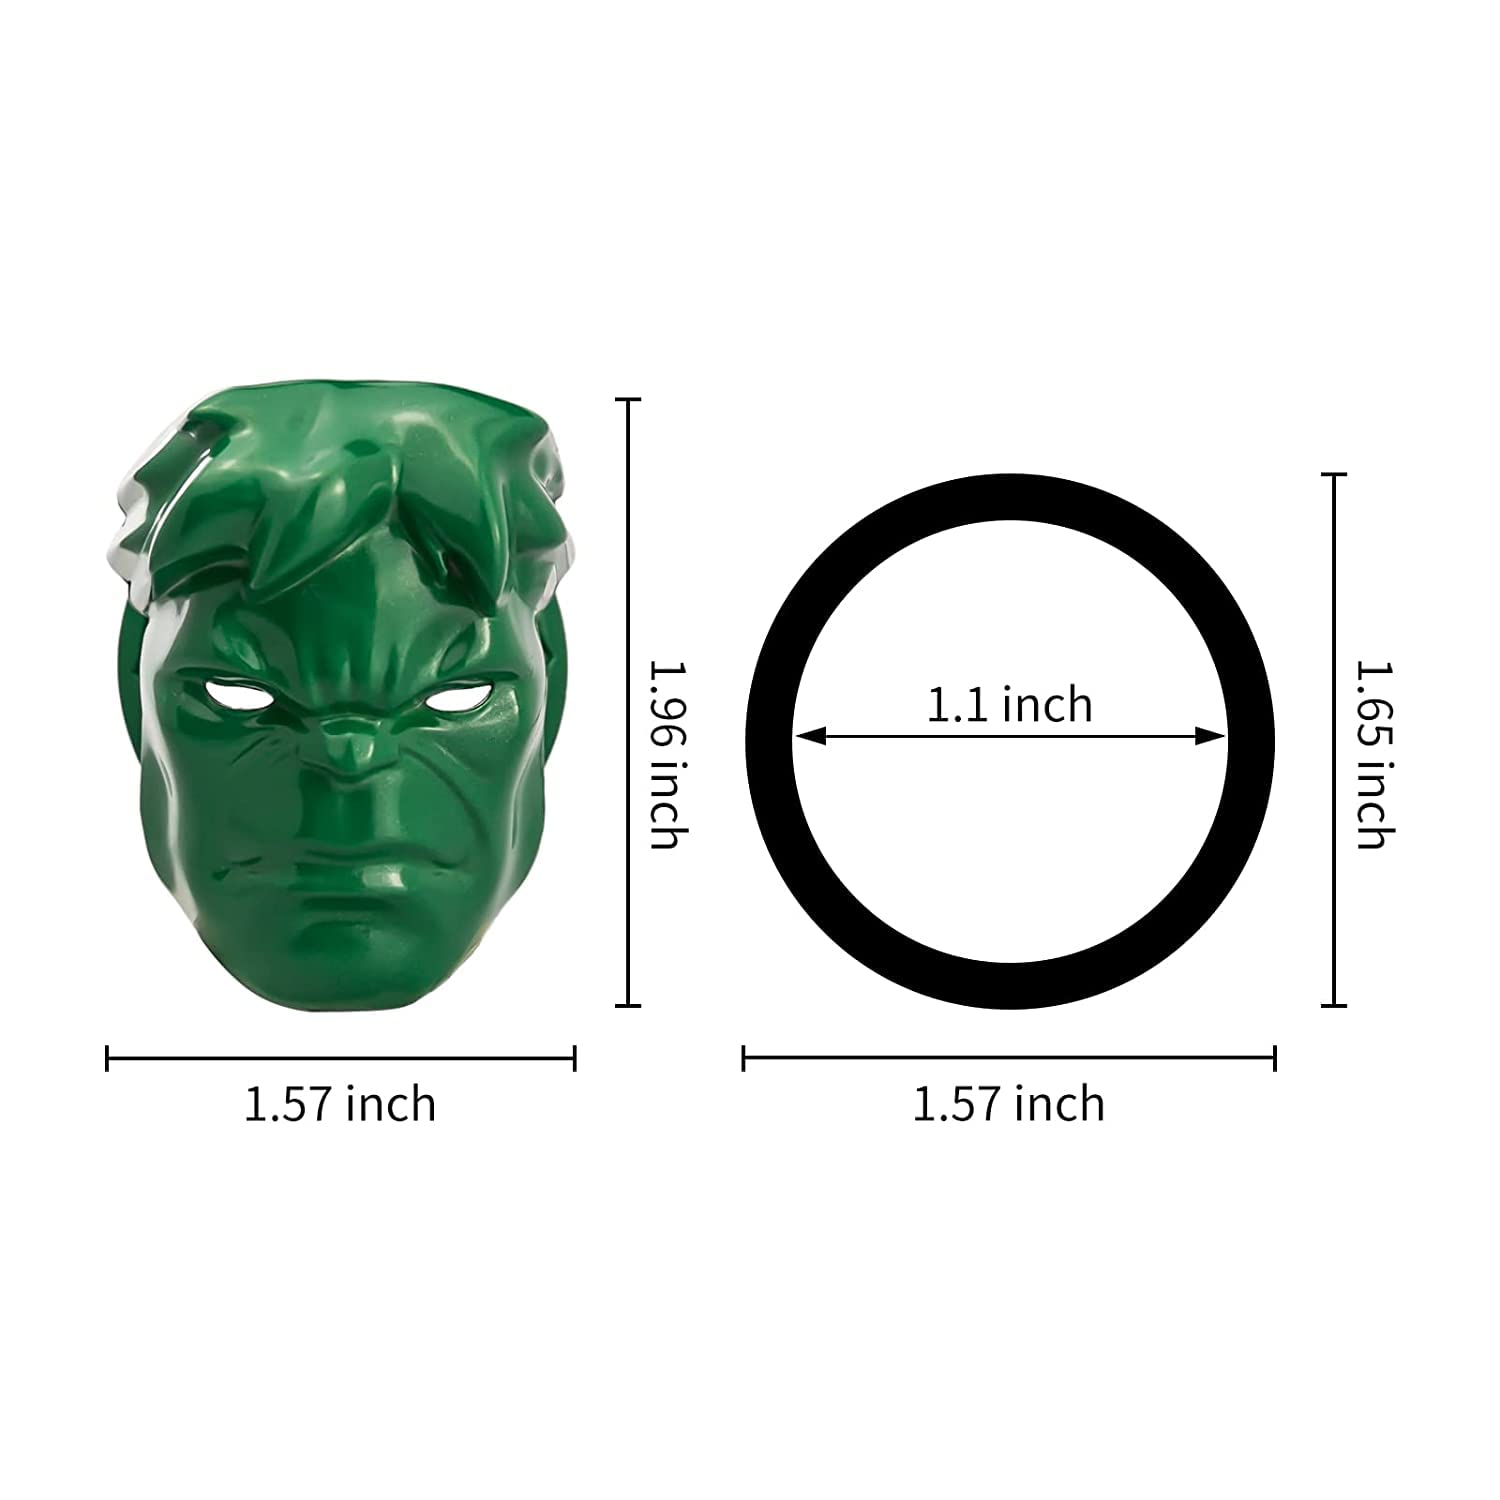 New Premium Metal Superhero 3D Design Car Push to Start Ignition Button Cover Interior for All Universal Car Start Button Decoration Ring (Hulk Green)